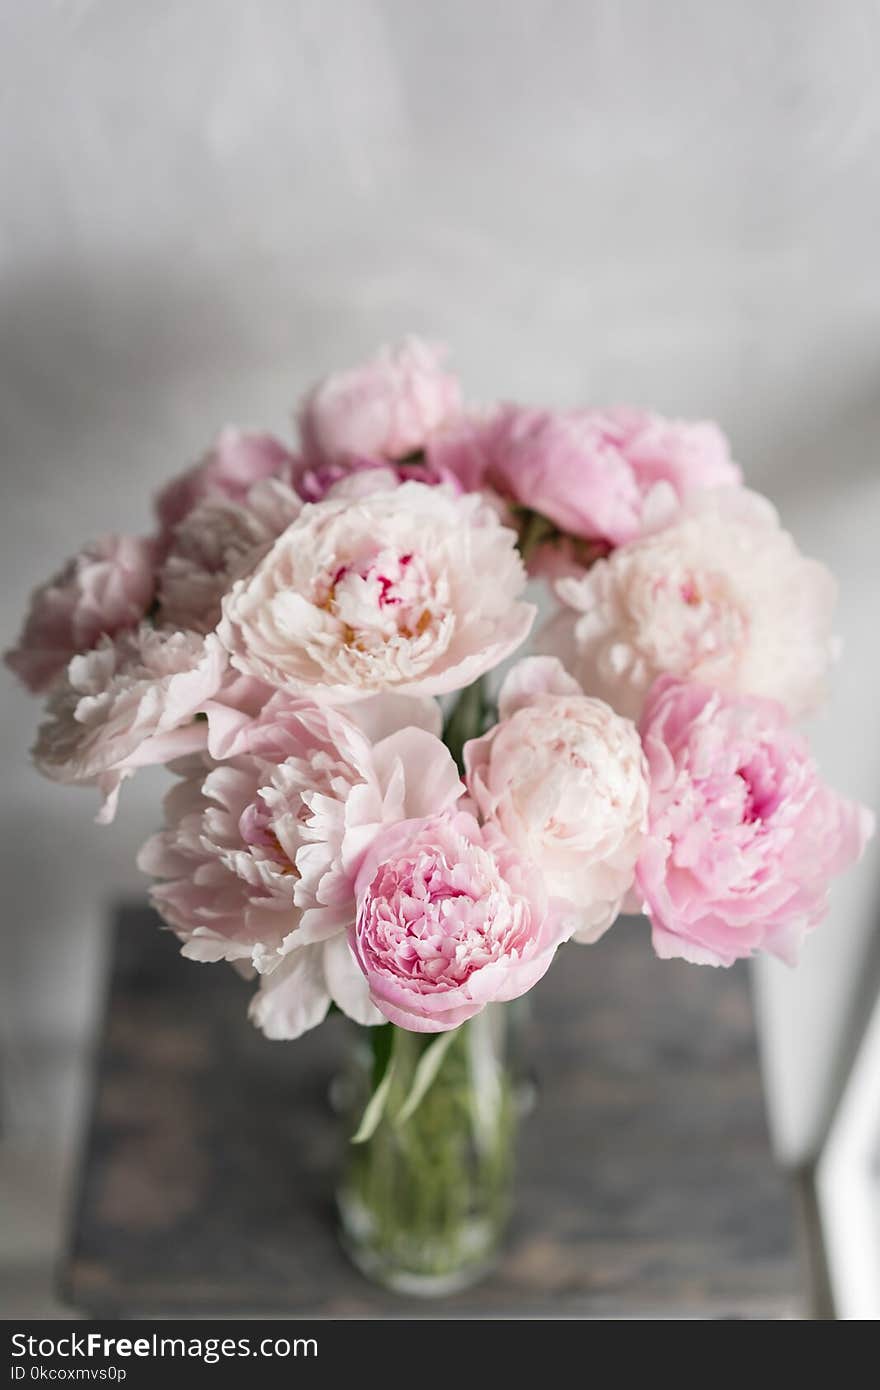 Cute and lovely peony. many layered petals. Bunch pale pink peonies flowers light gray background. Wallpaper, Vertical